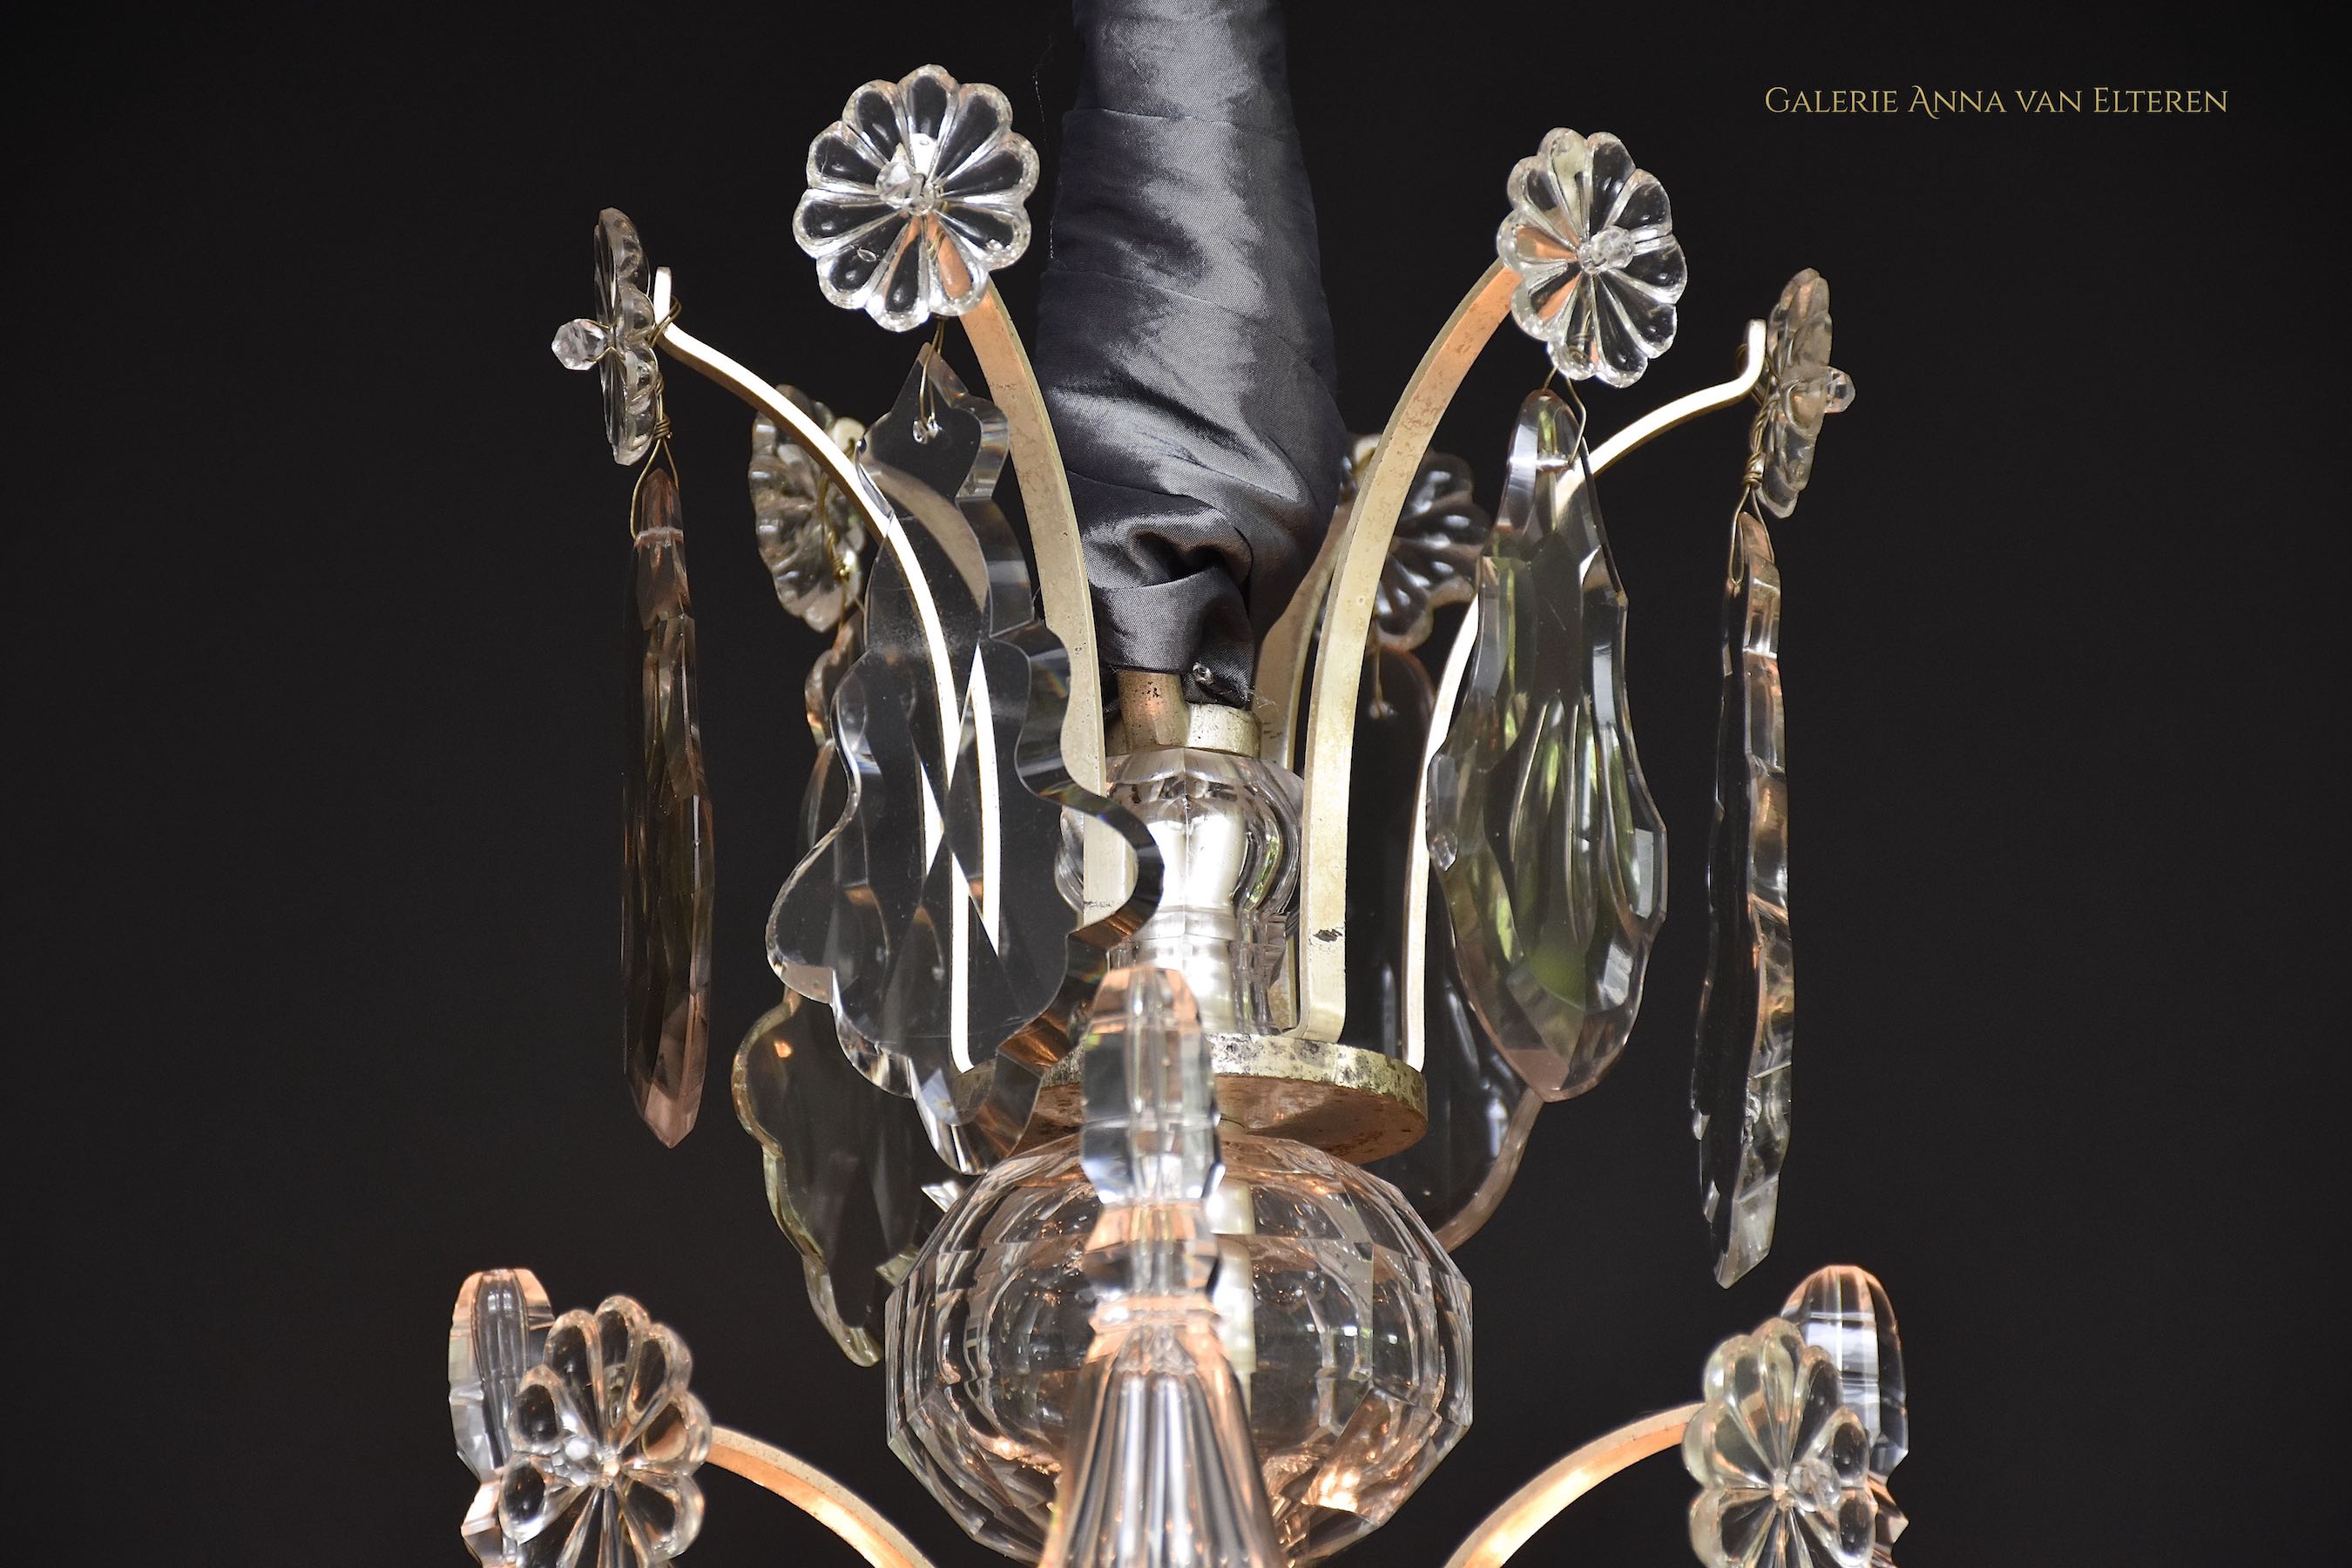 Large French chandelier in the style of Louis XV